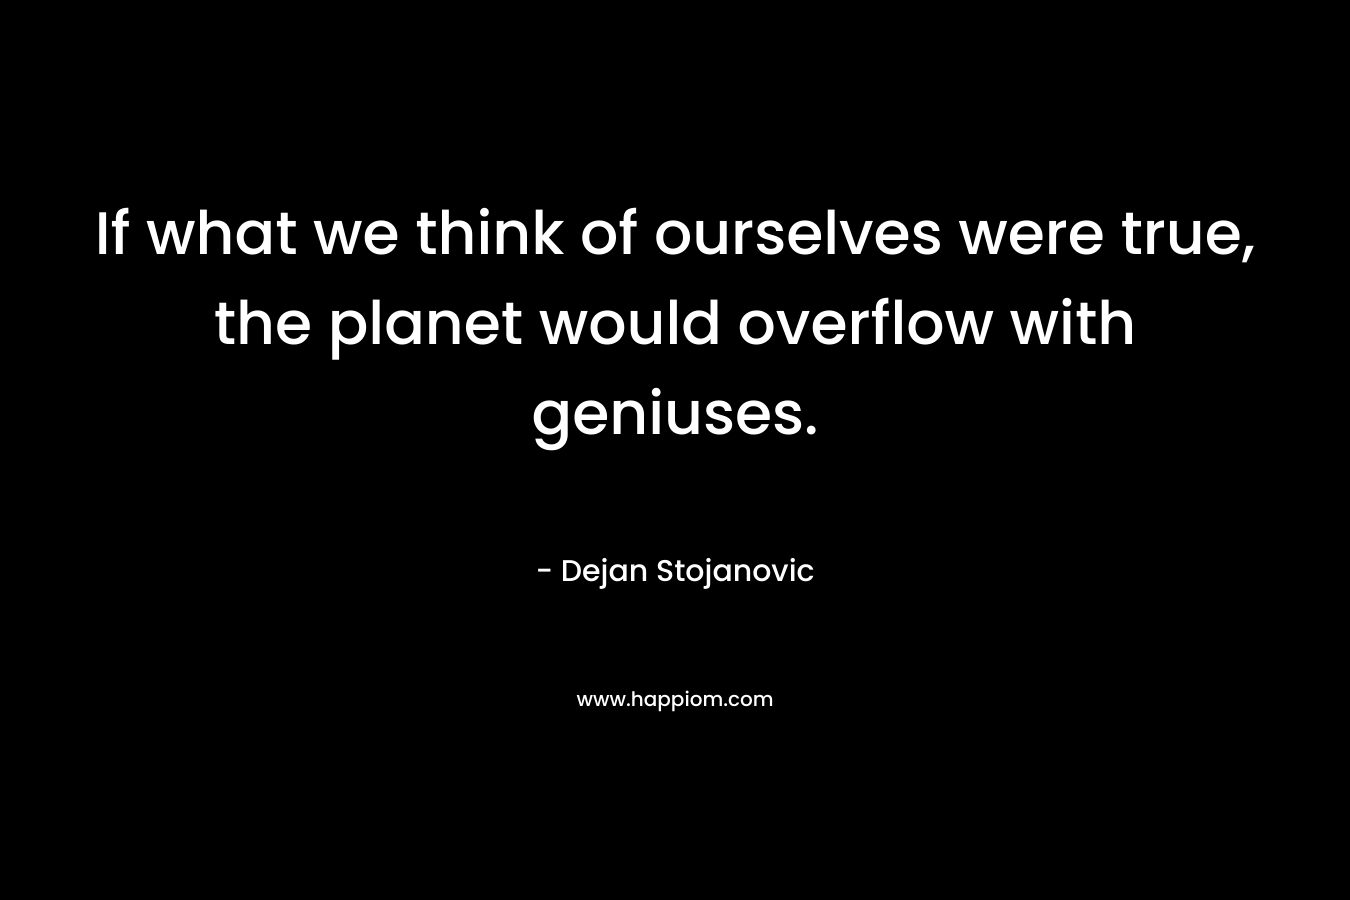 If what we think of ourselves were true, the planet would overflow with geniuses. – Dejan Stojanovic